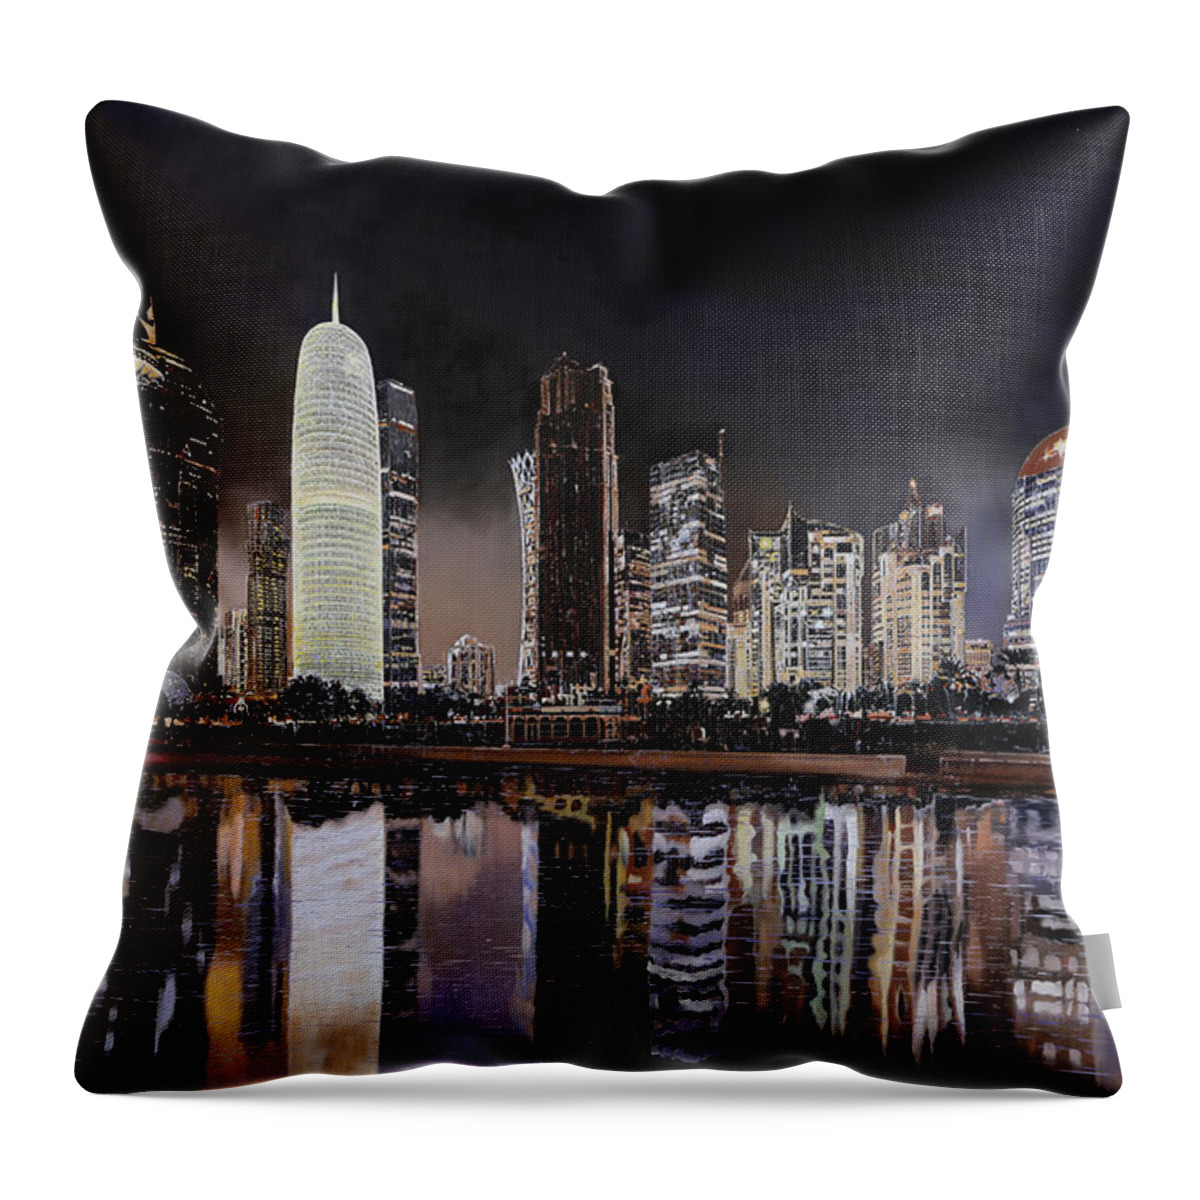 Night In Doha Throw Pillow featuring the painting Doha Qatar by Guido Borelli